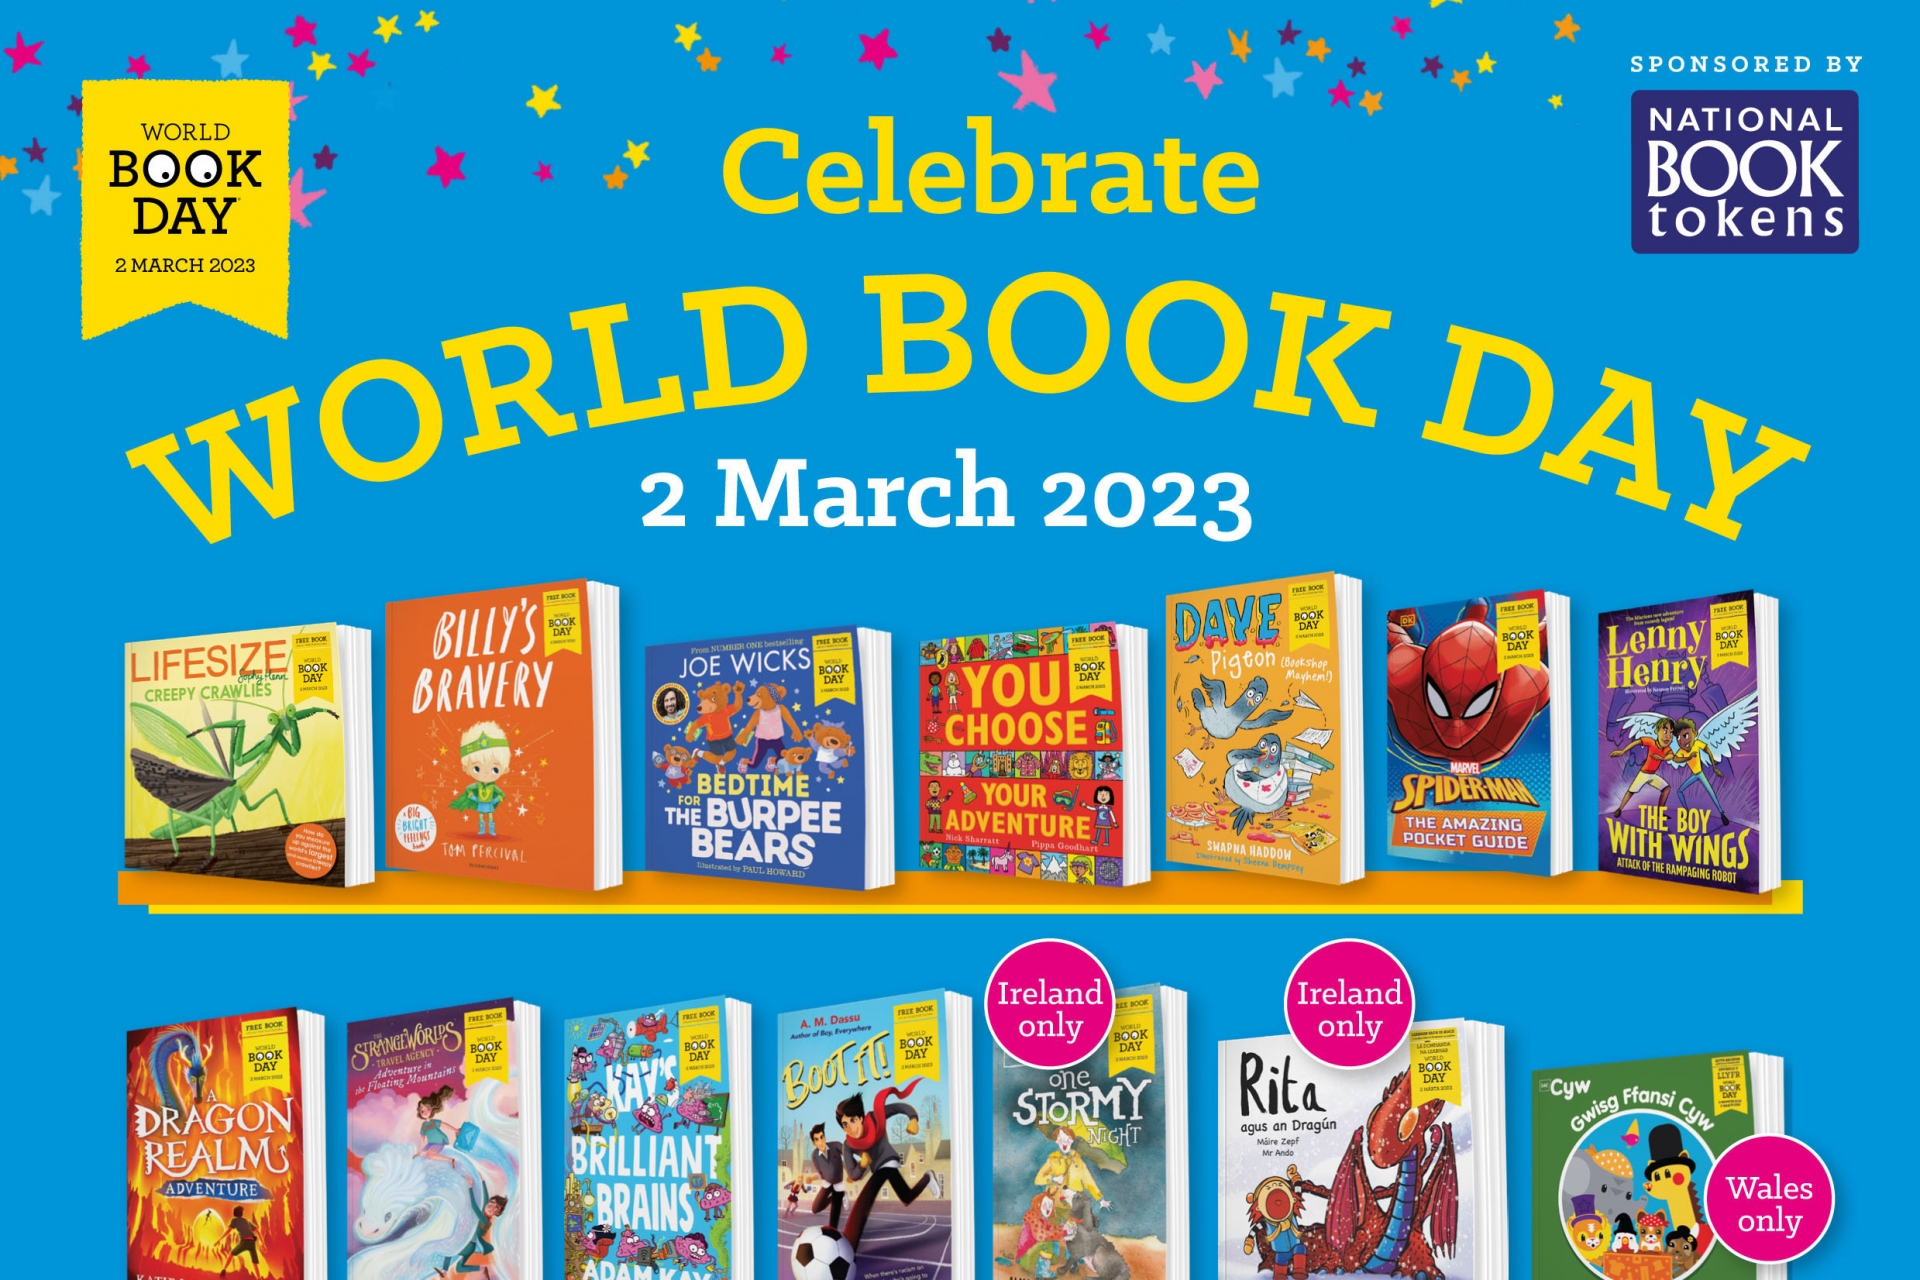 Amazon titles on offer for 99p for World Book Day in the UK and Ireland